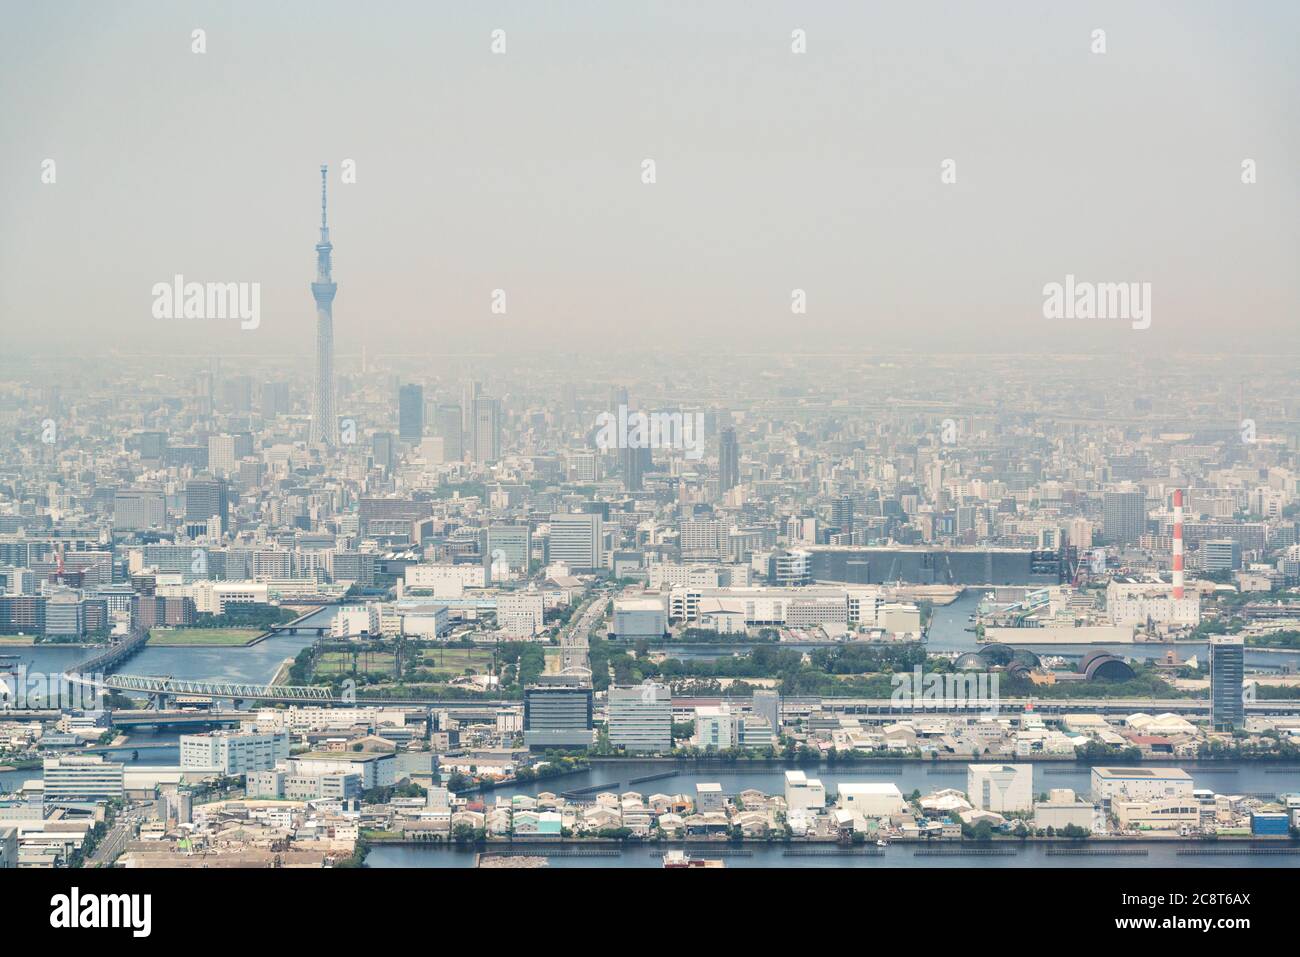 Aerial view of Tokyo city tower, skyscrapers, smog in the air Stock Photo